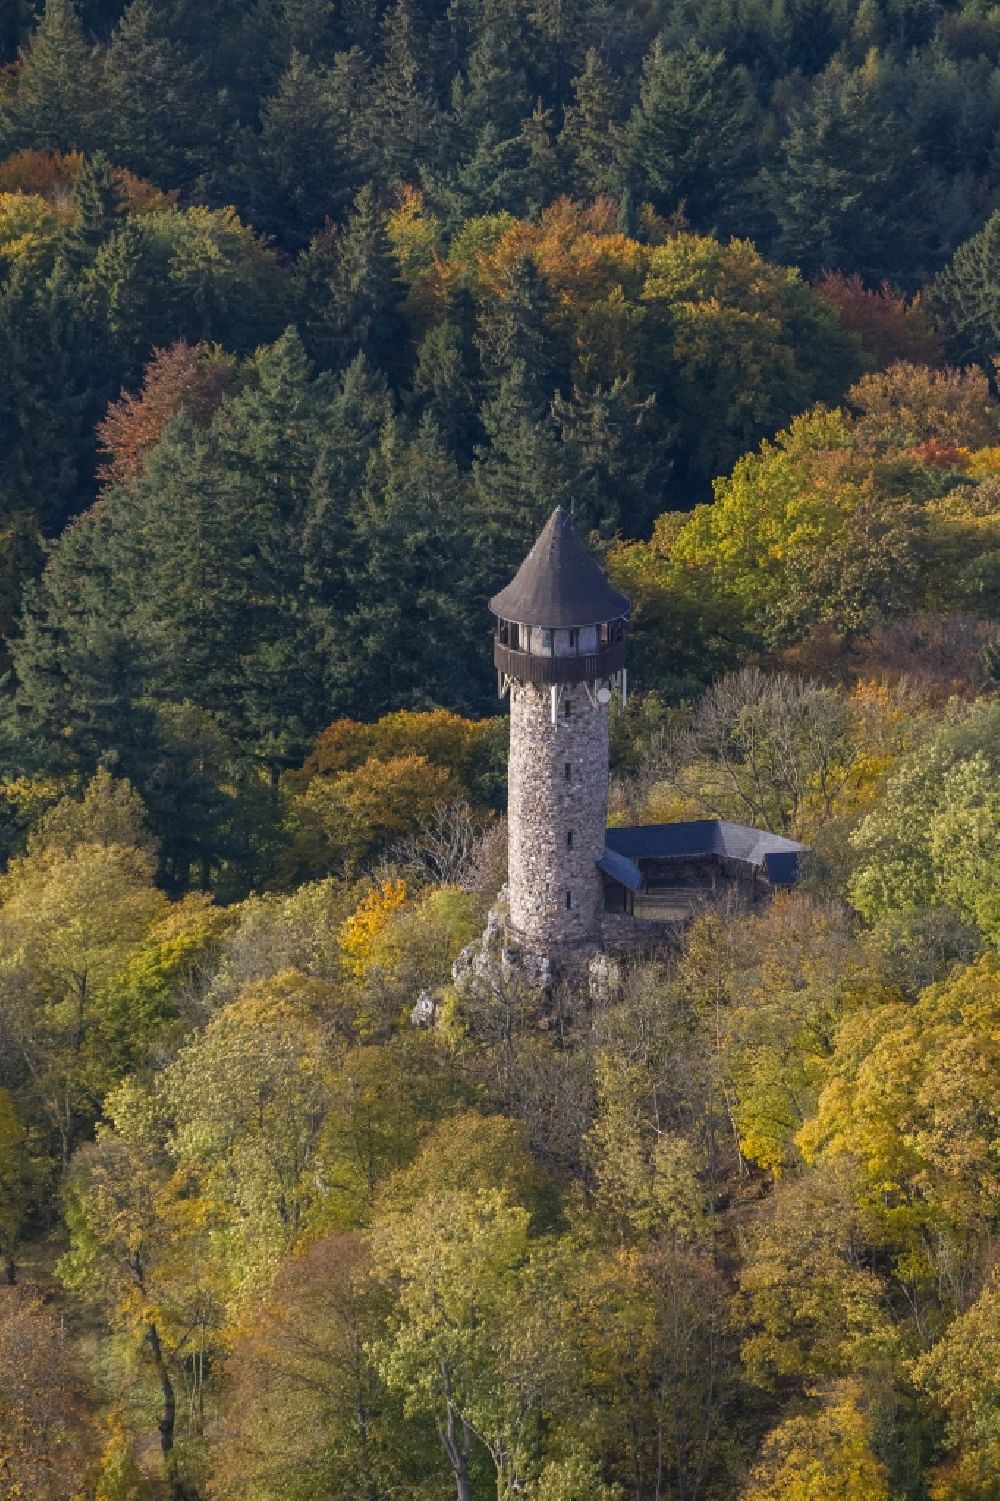 Aerial photograph Kempfeld - Autumn - Landscape at the tower on the ruins of the castle in the wild nature reserve Wildenburg near Kempfeld in Rhineland-Palatinate